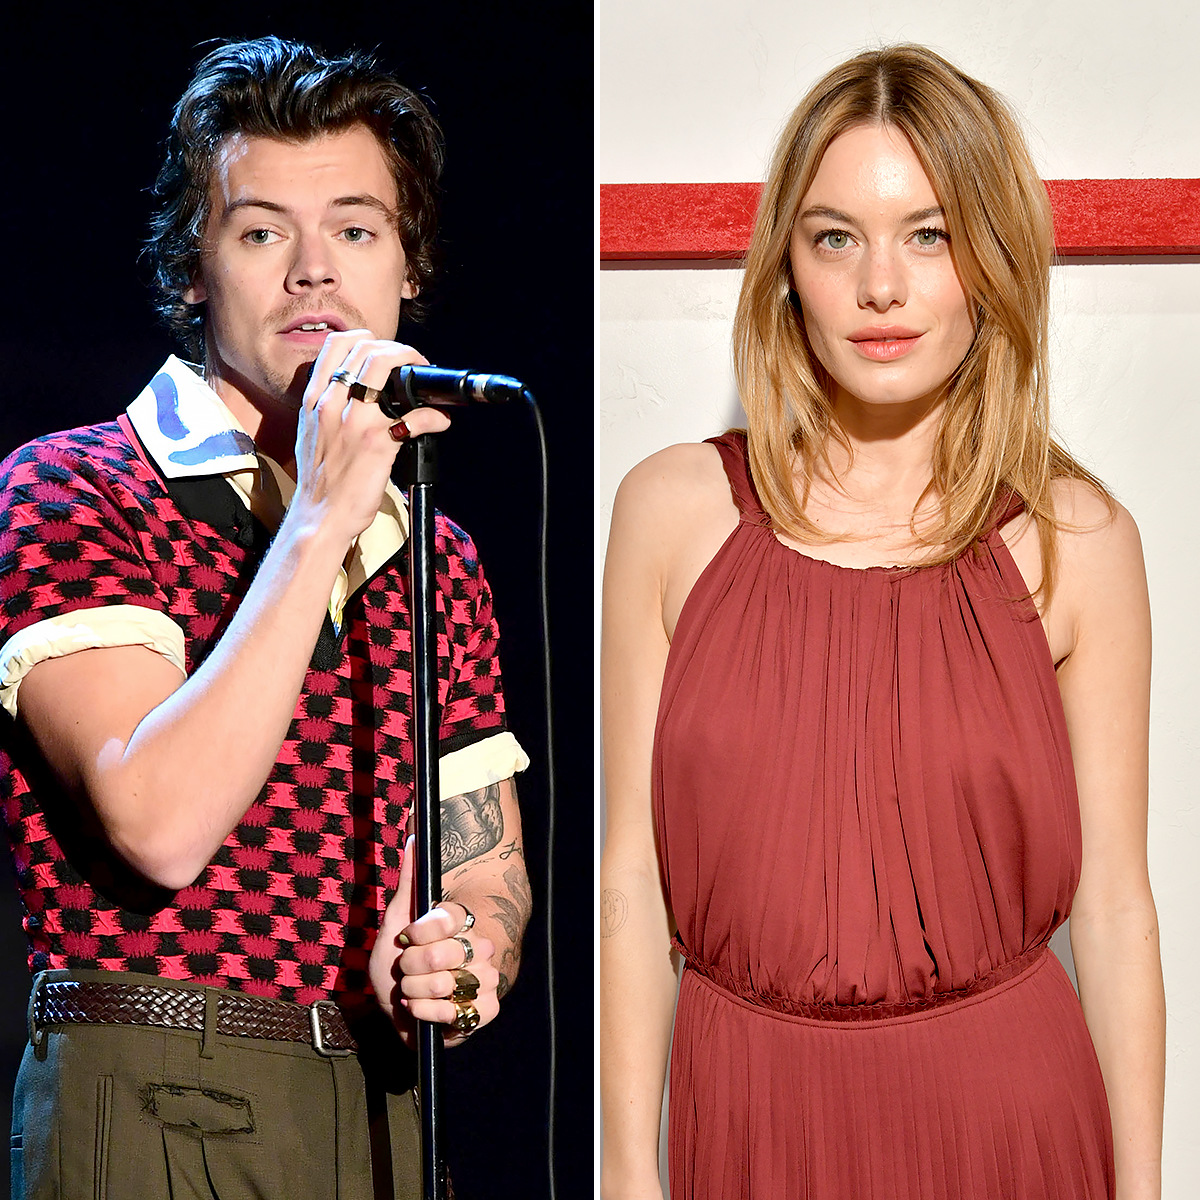 Sprout as a result human resources Harry Styles Puts Ex Camille Rowe's Voicemail on New Song 'Cherry'